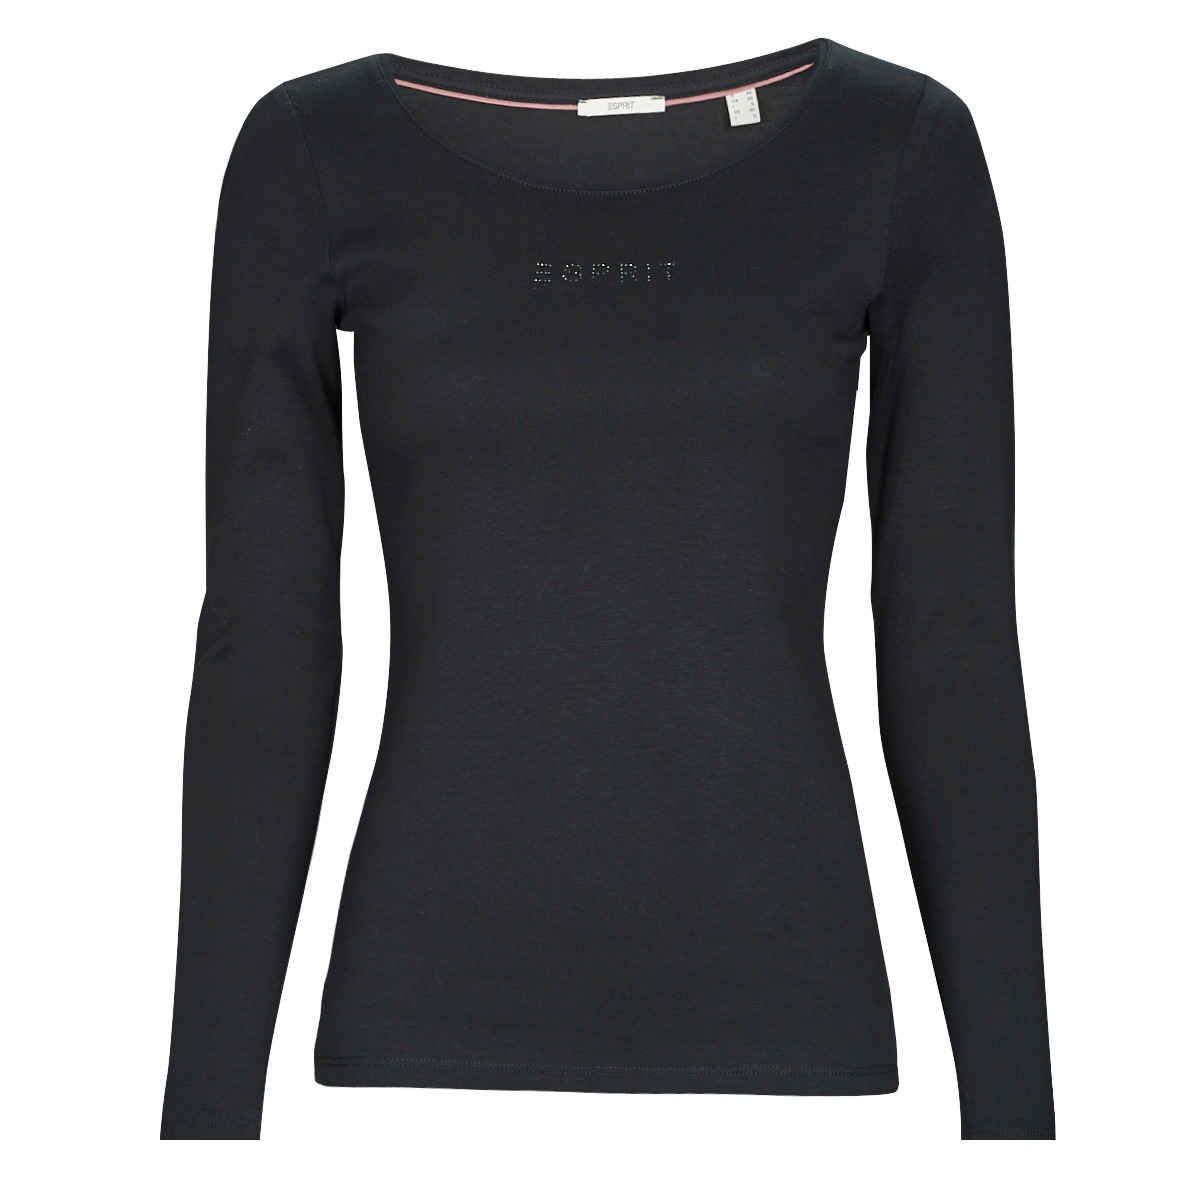 Esprit SUS lslv sl Black Women sleeved Long shirts Spartoo delivery - Clothing | ! - Free NET